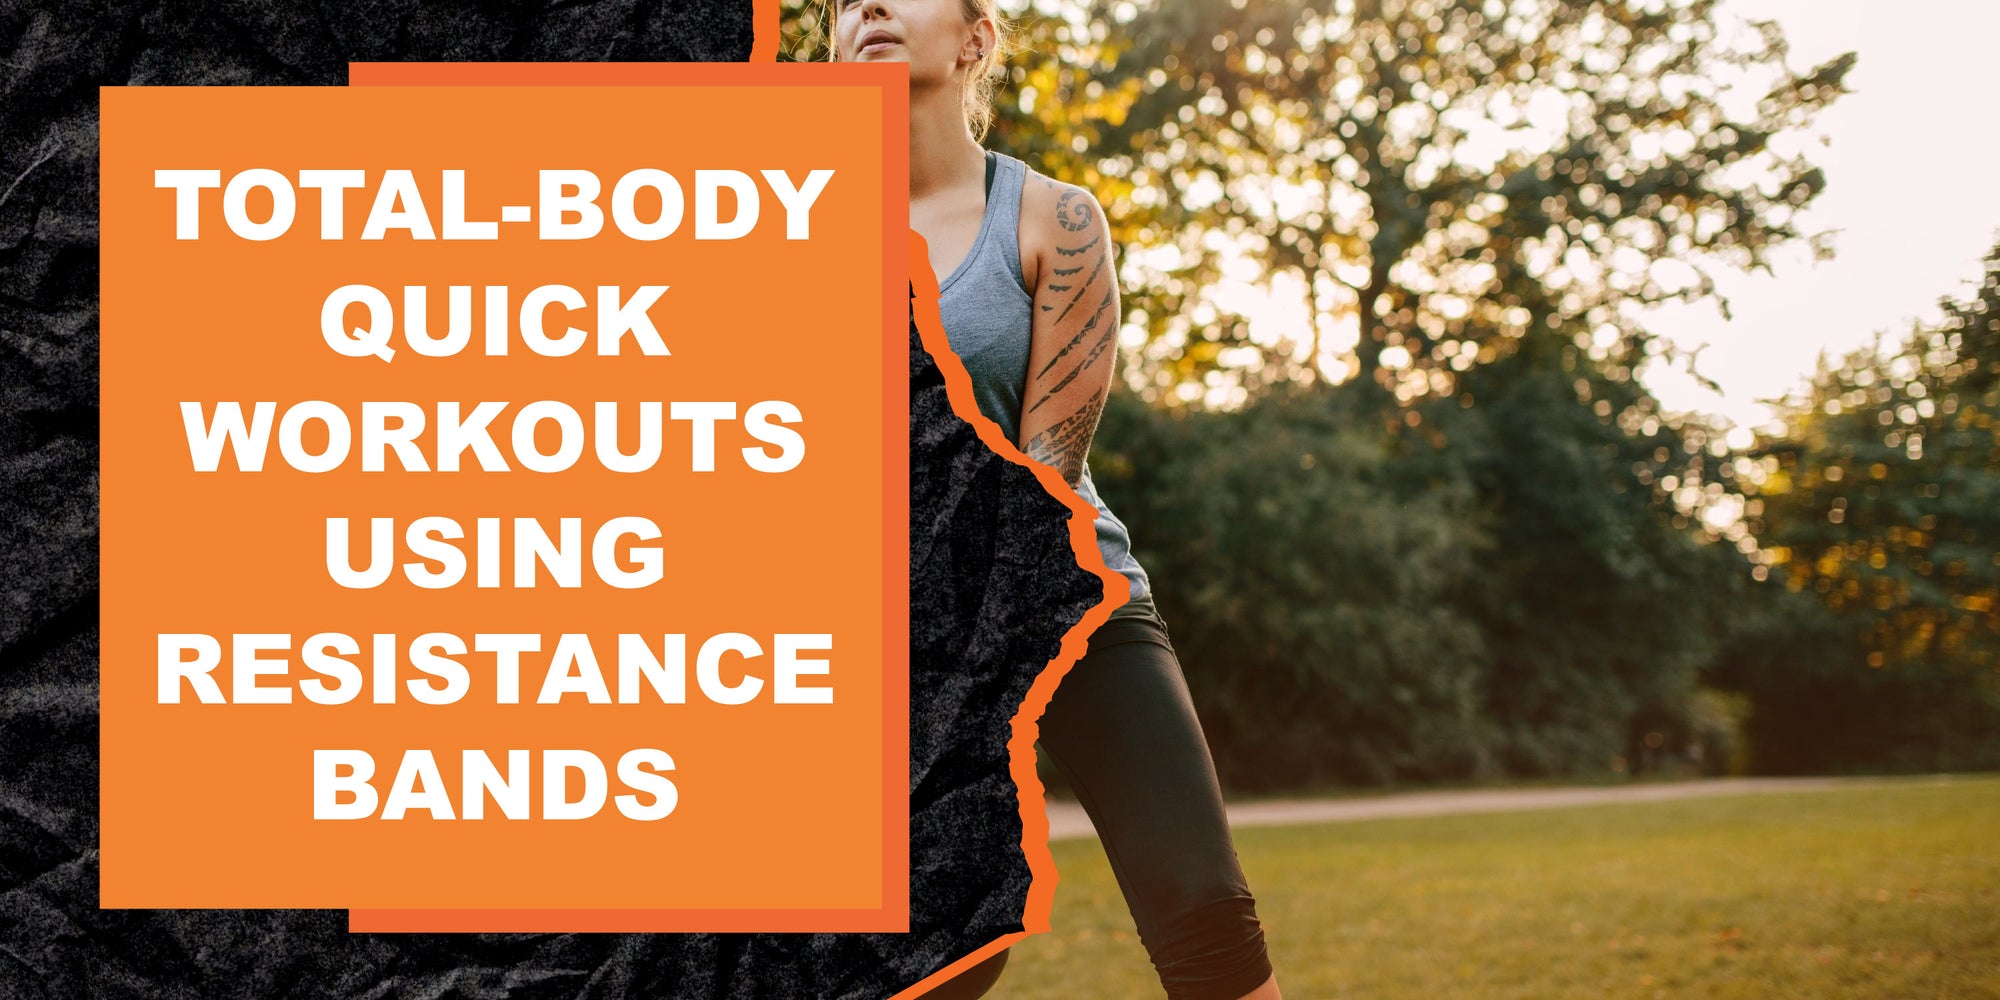 Total-Body Quick Workouts Using Resistance Bands